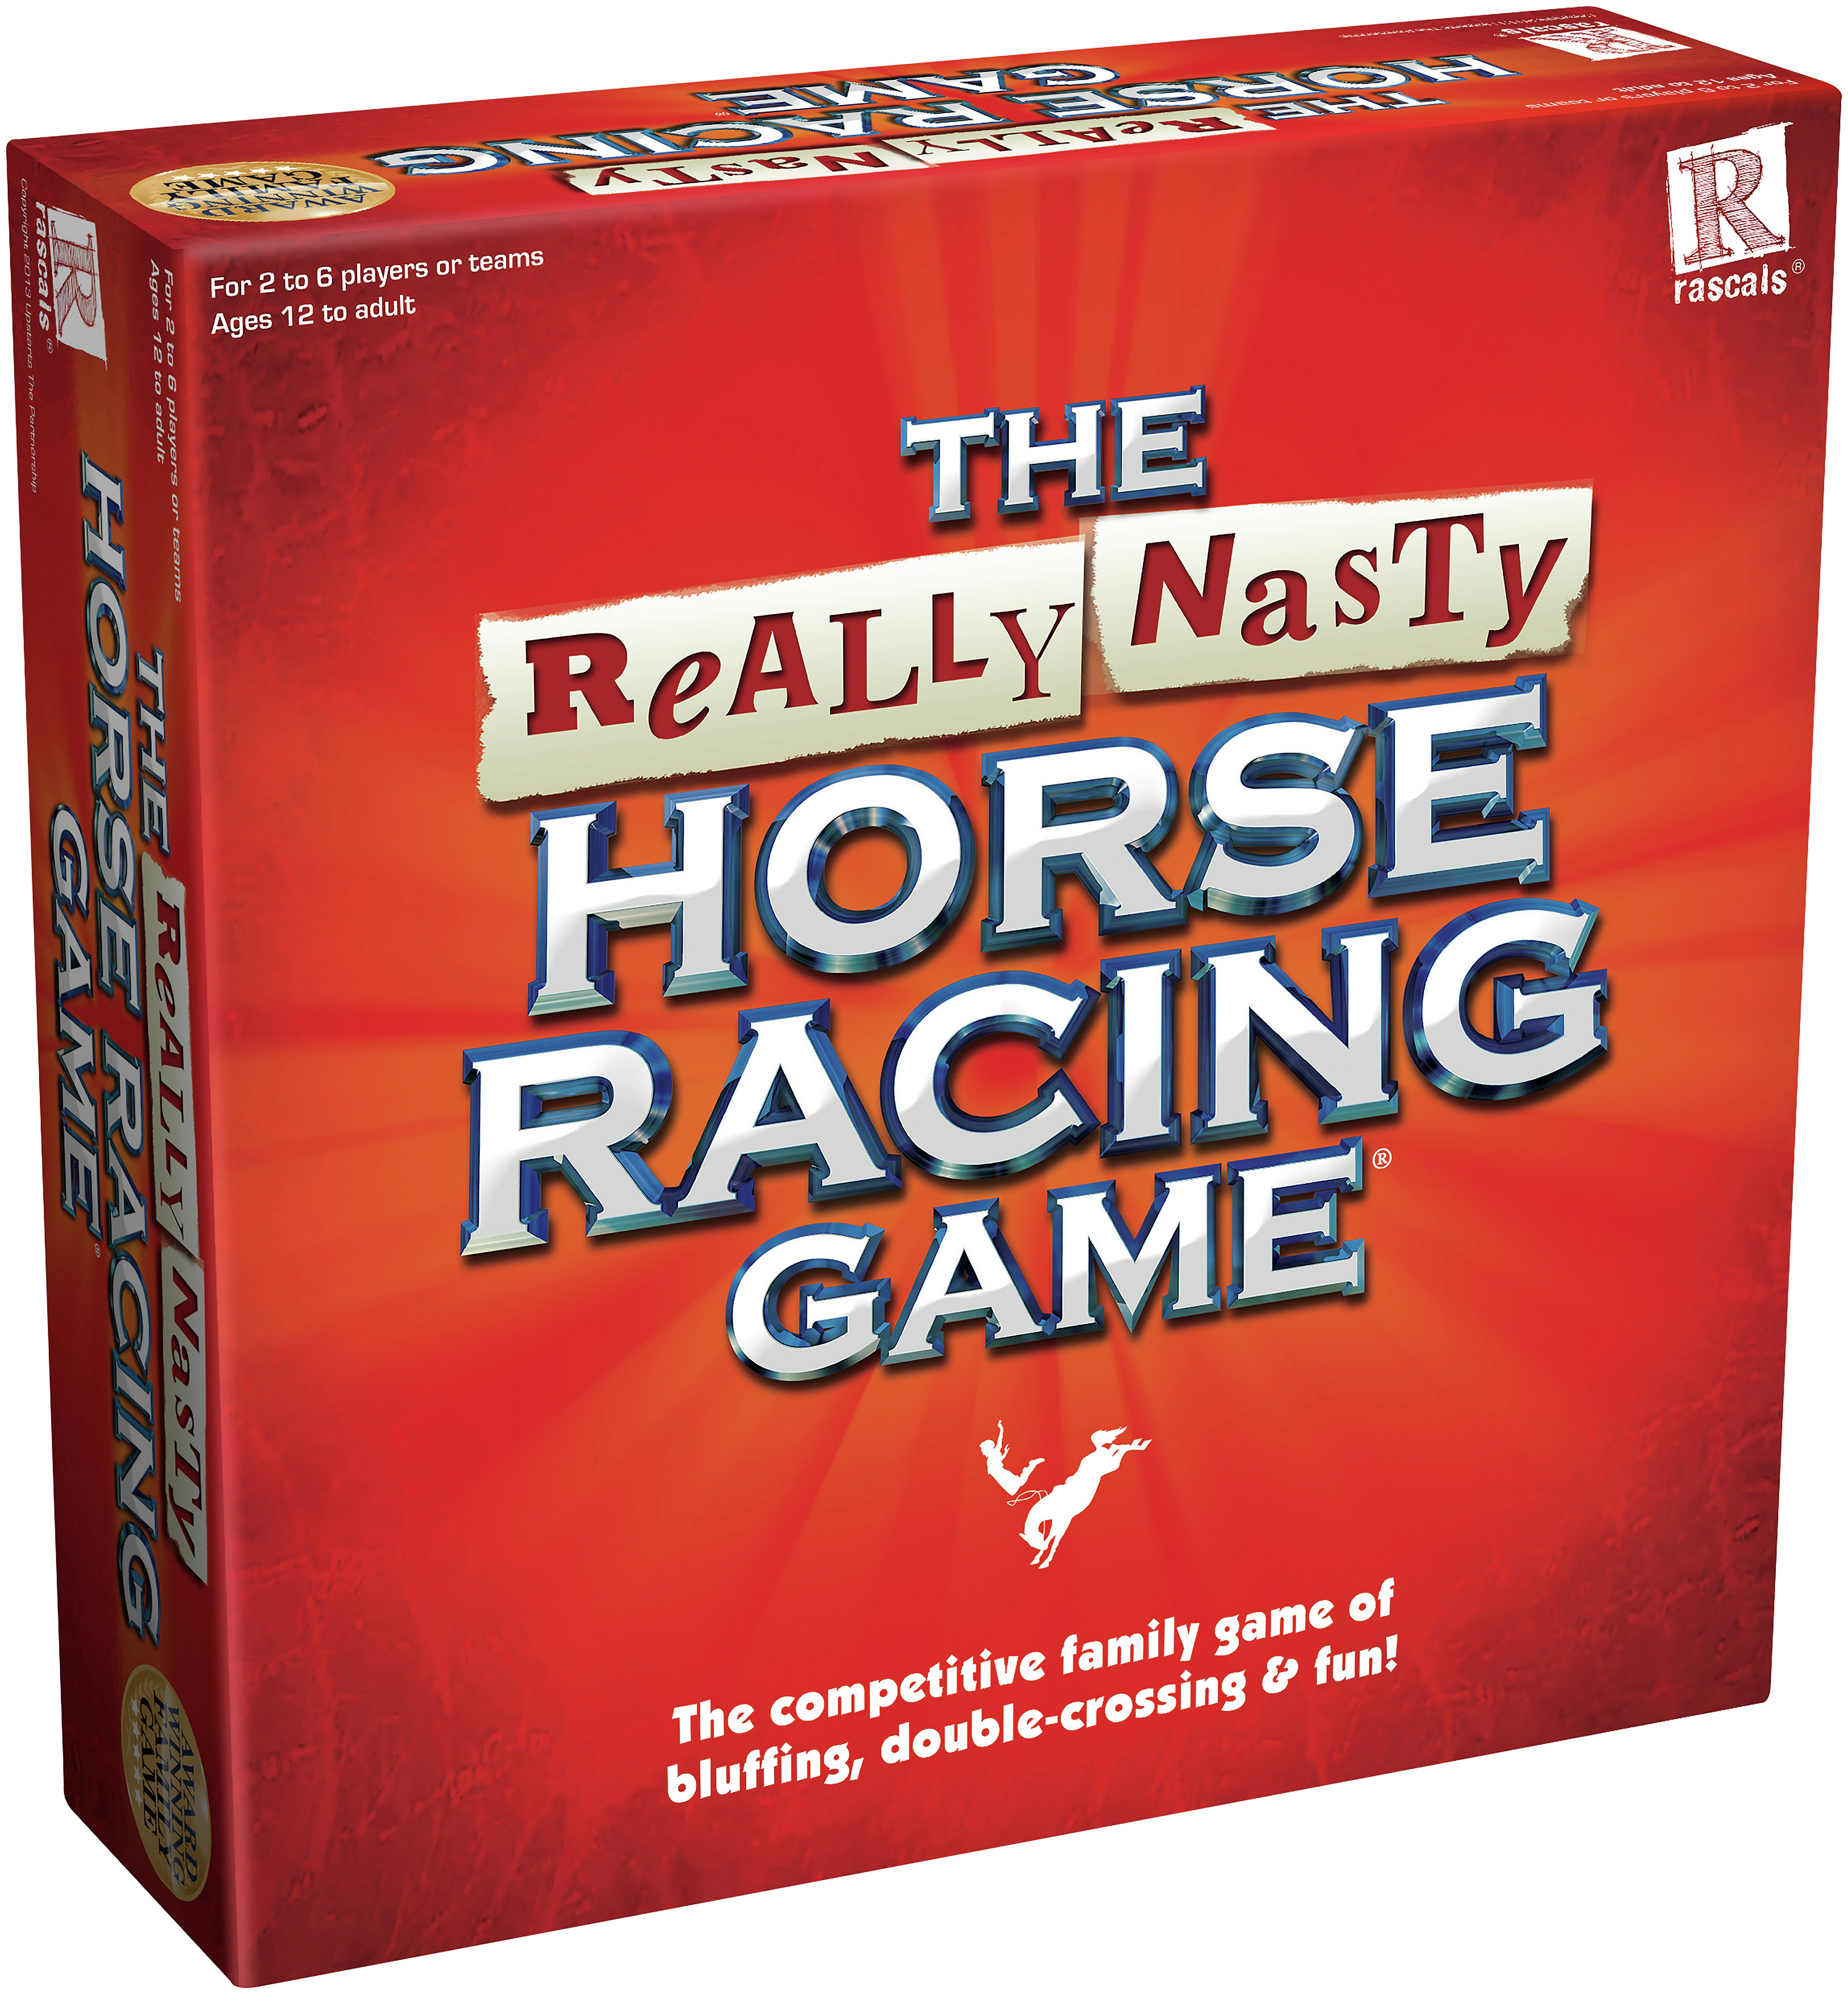 Really Nasty Horse Racing Game.